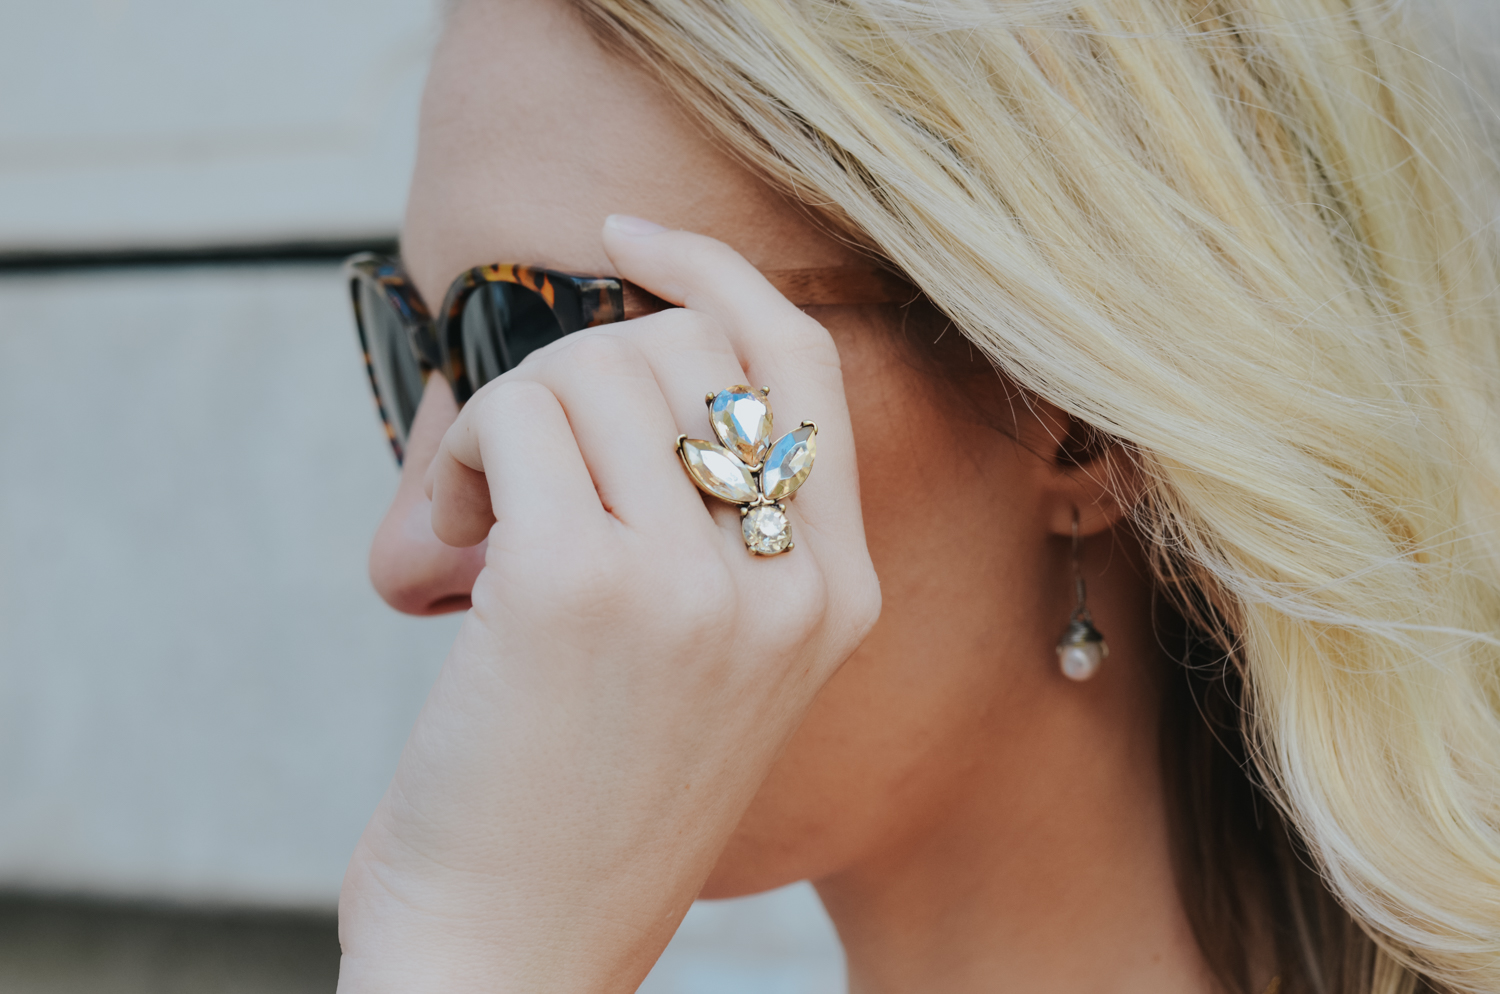 Statement ring from 7 Charming Sisters